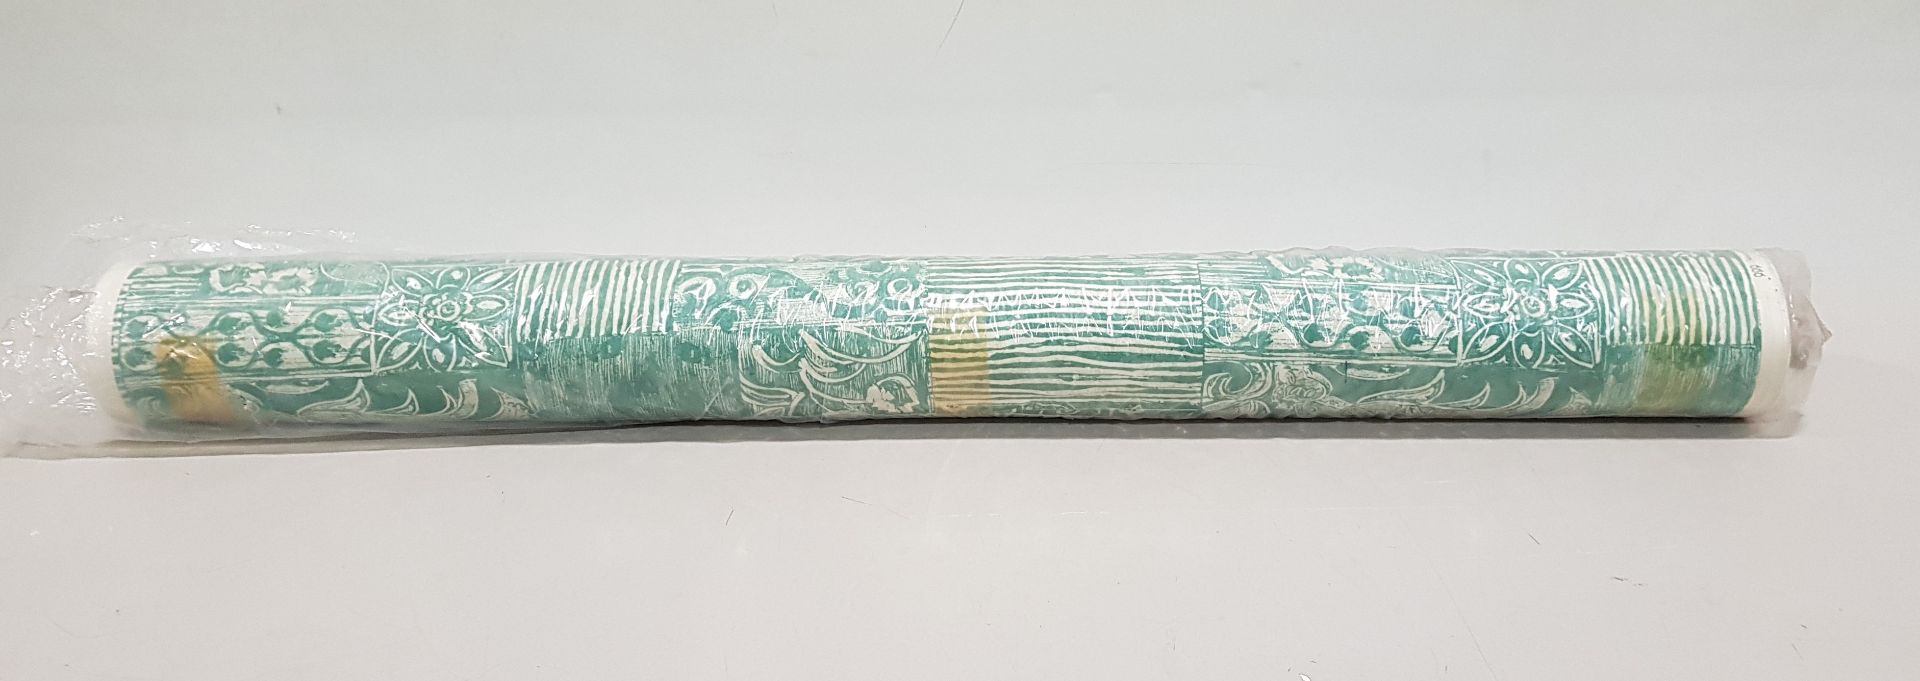 1 X ROLL OF FABRIC IN GREEN AND WHITE FLORAL DESIGN -LENGTH 30 M - £12.99 / M - TOTAL £389.7